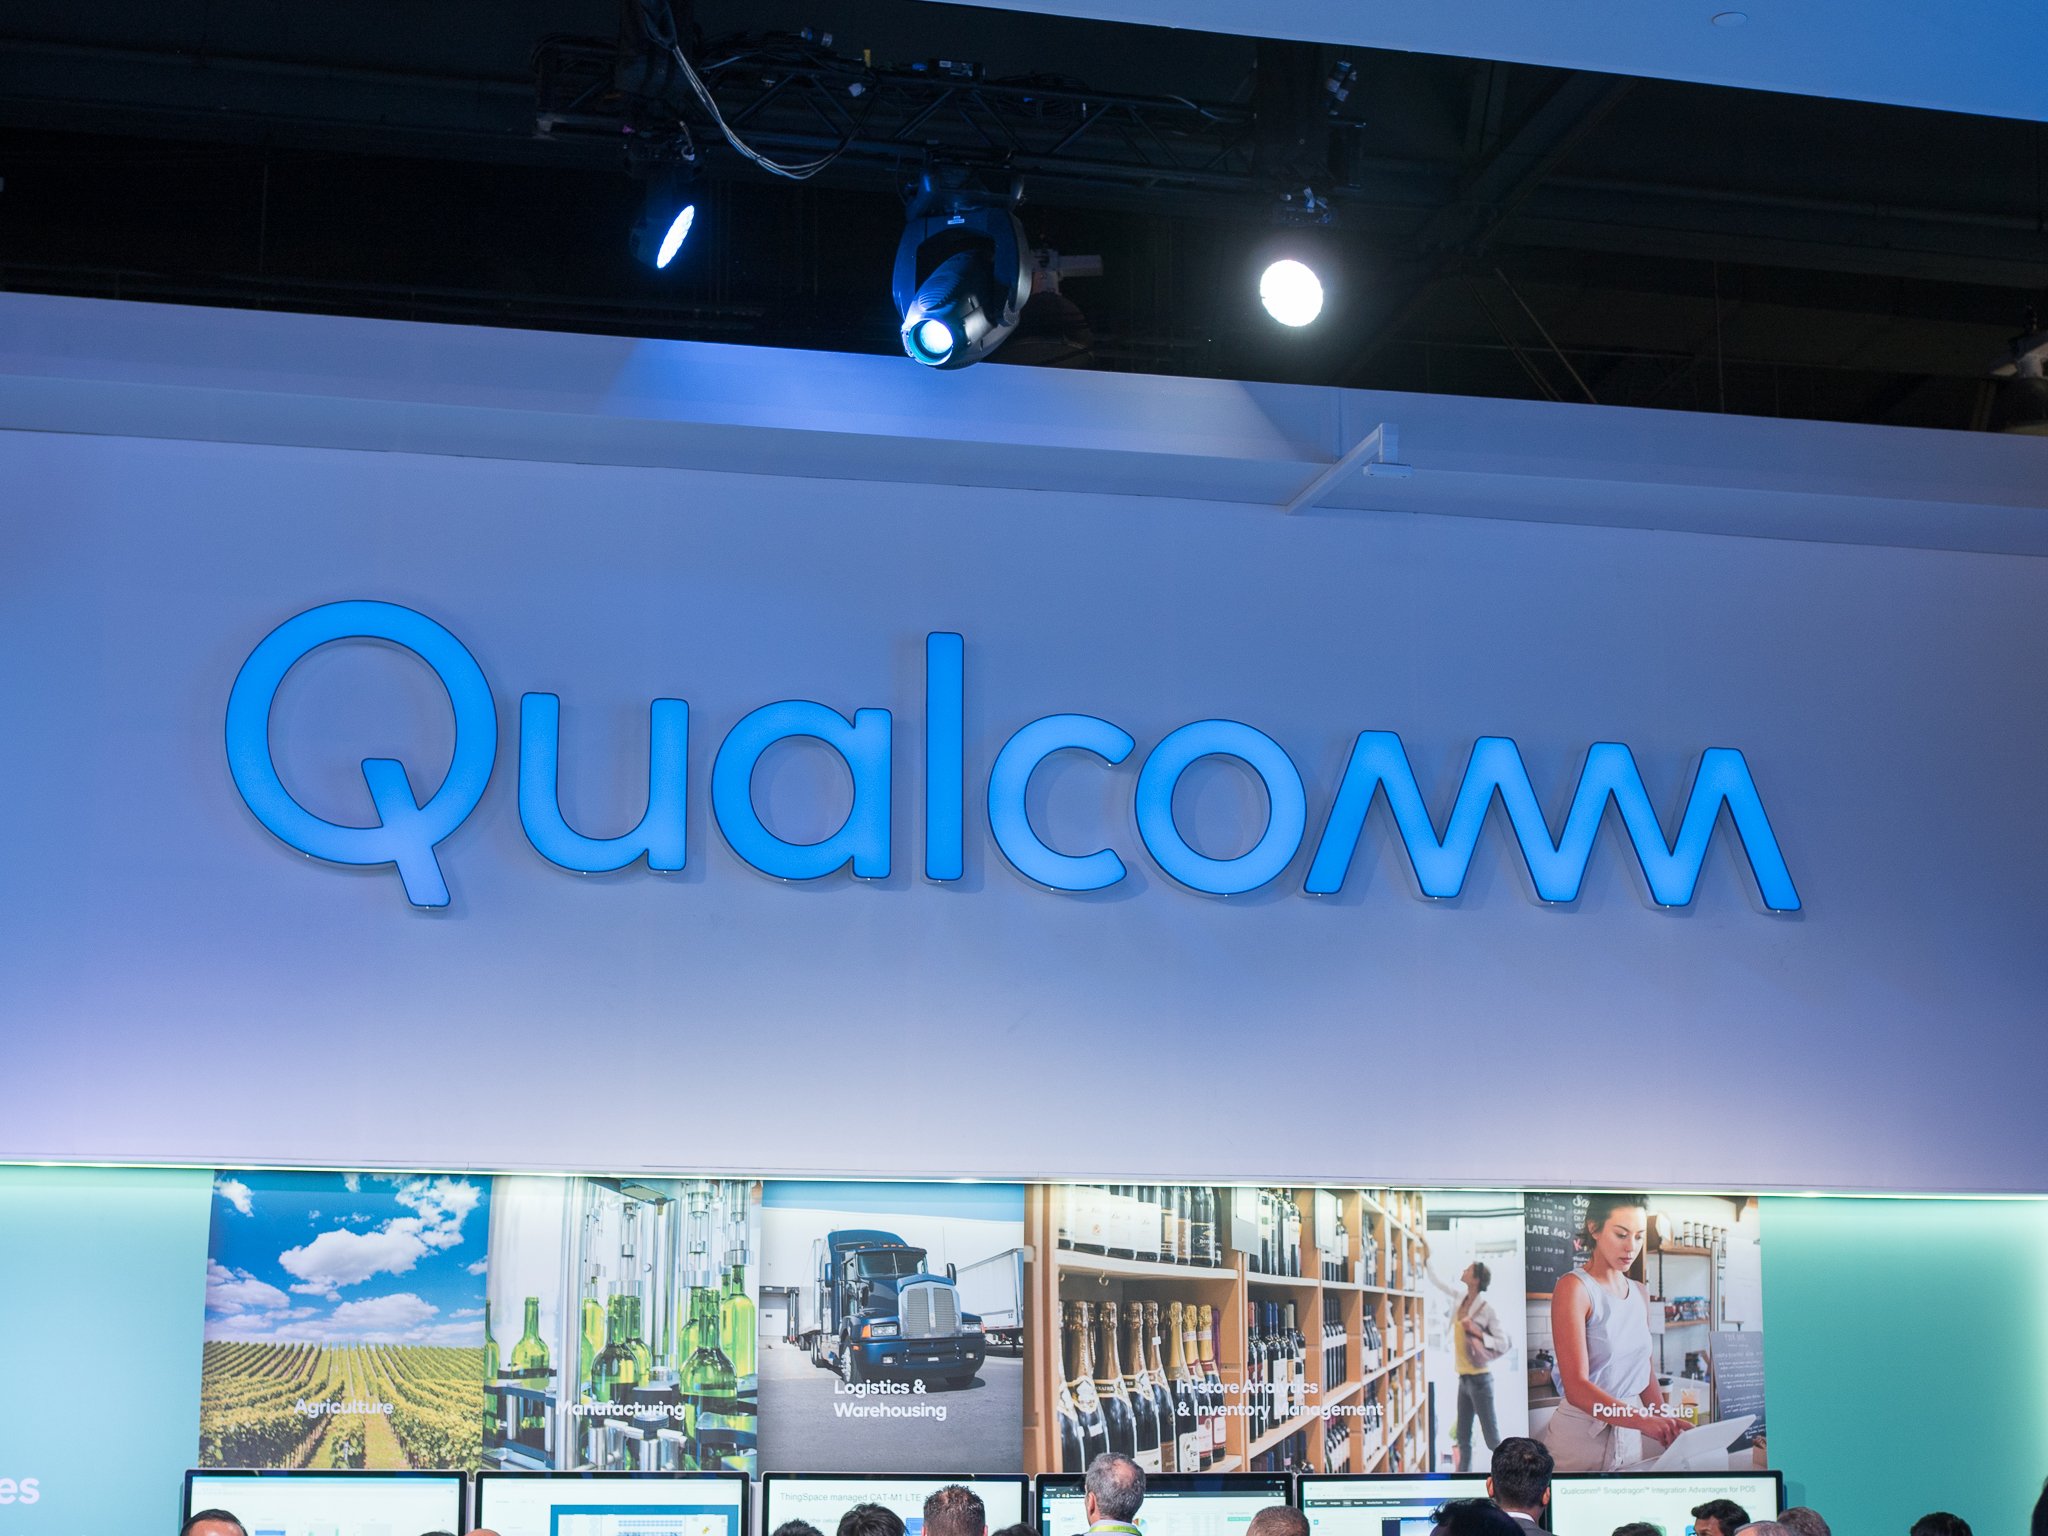 Qualcomm nearly doubled its chips sales last quarter thanks to 5G push